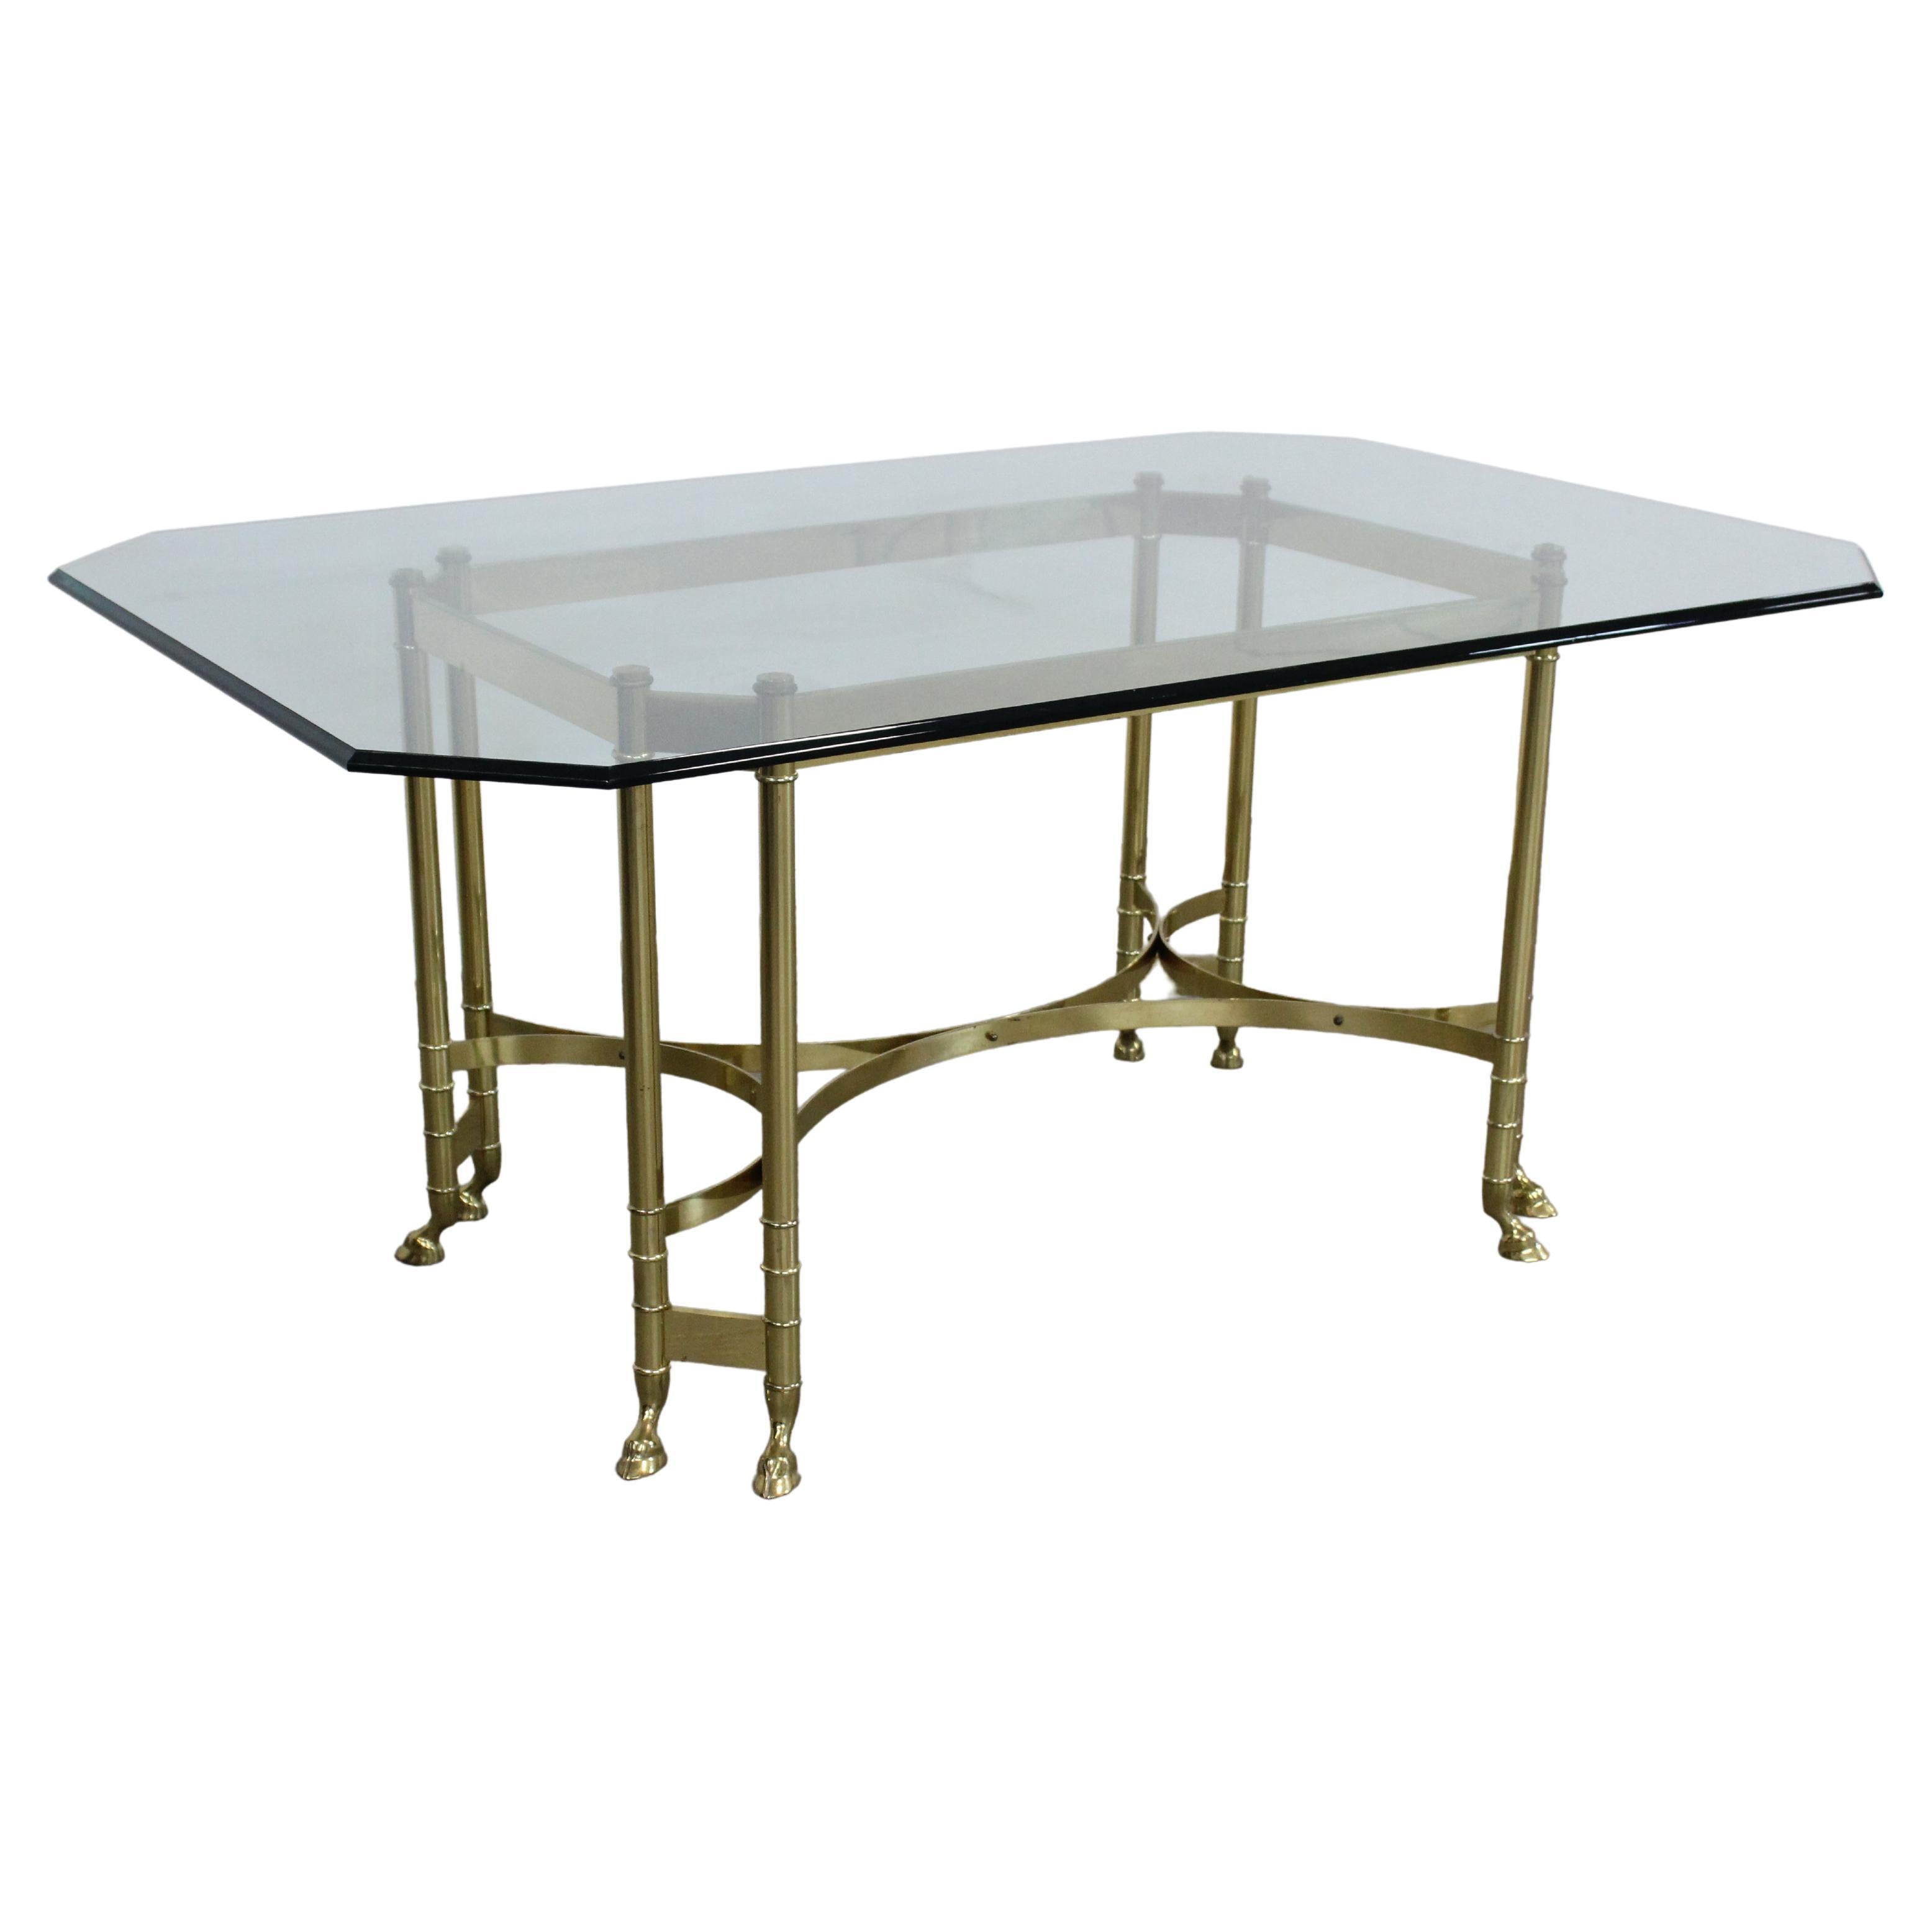 Vintage Brass and Glass Jansen Regency Style Hoof Foot Dining Table